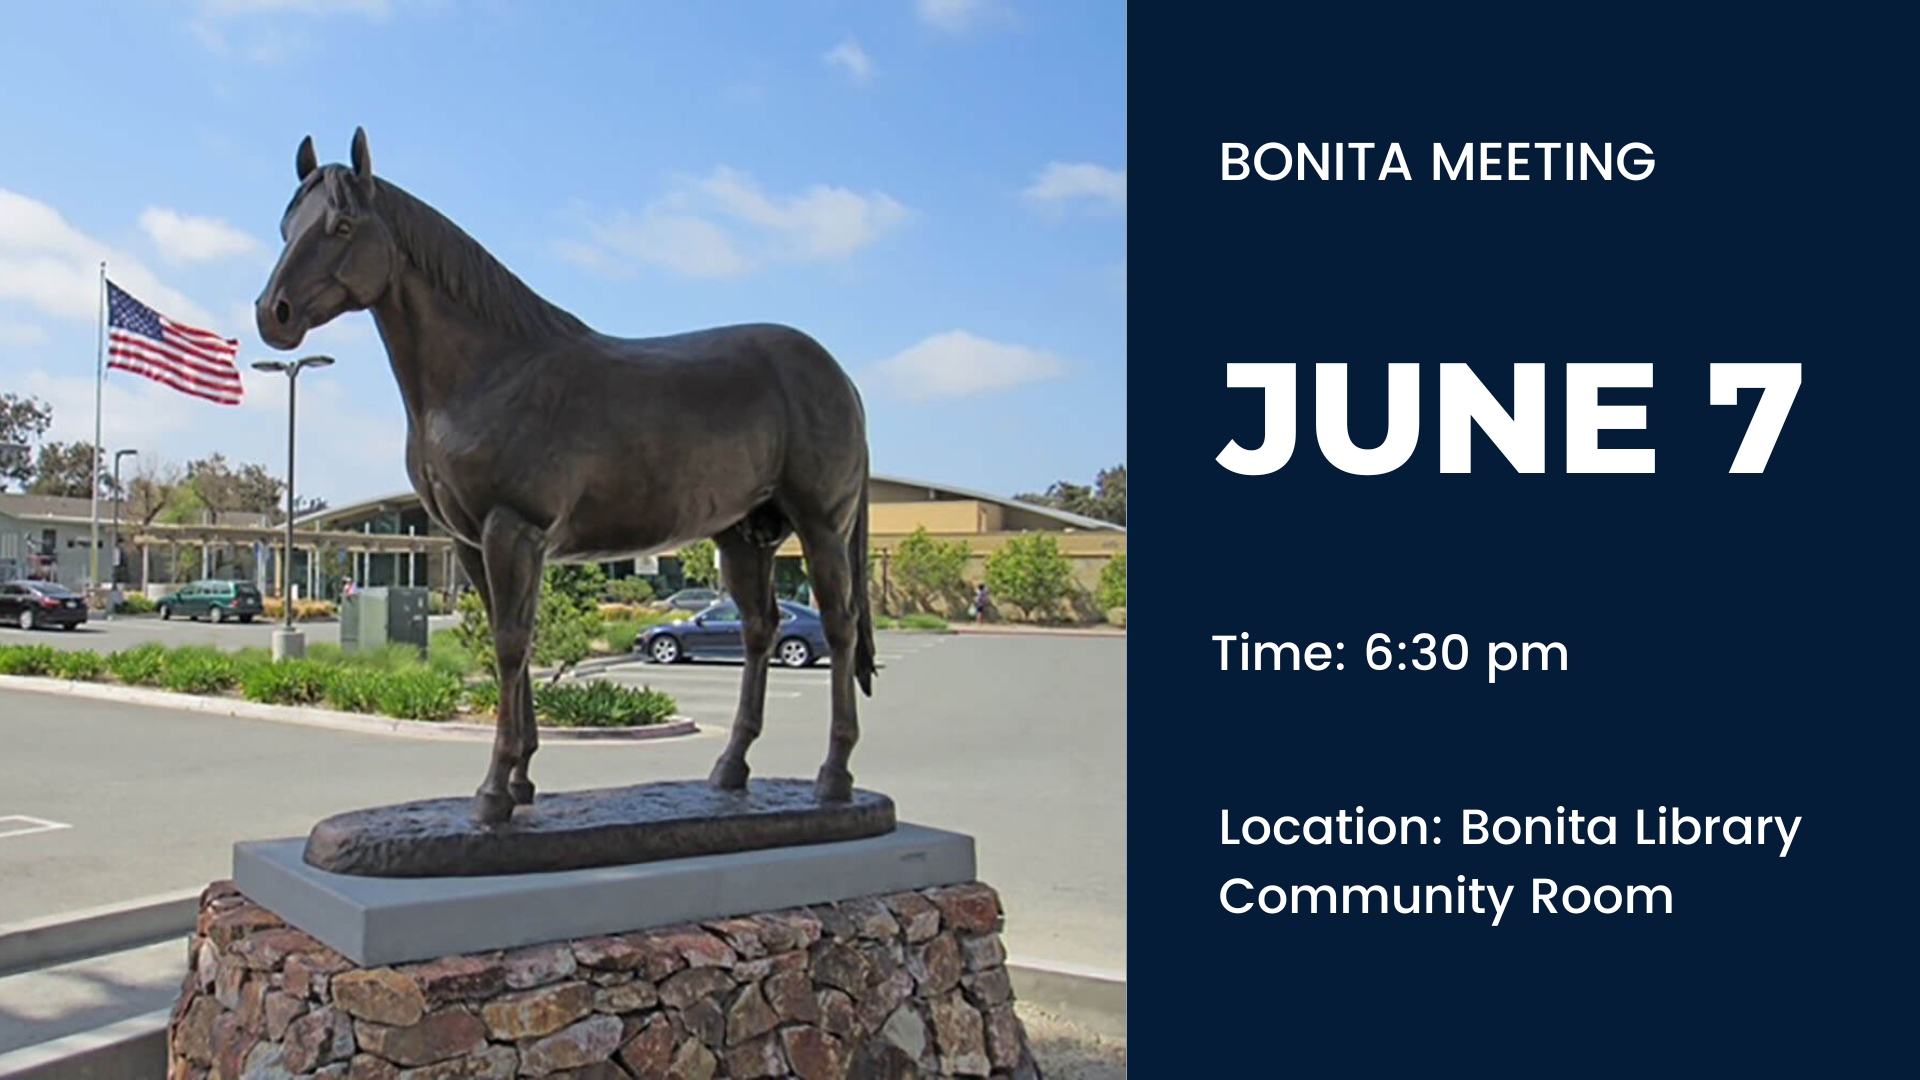 News from the recent SVCA June 7th Meeting. Read to learn more important information on community topics.